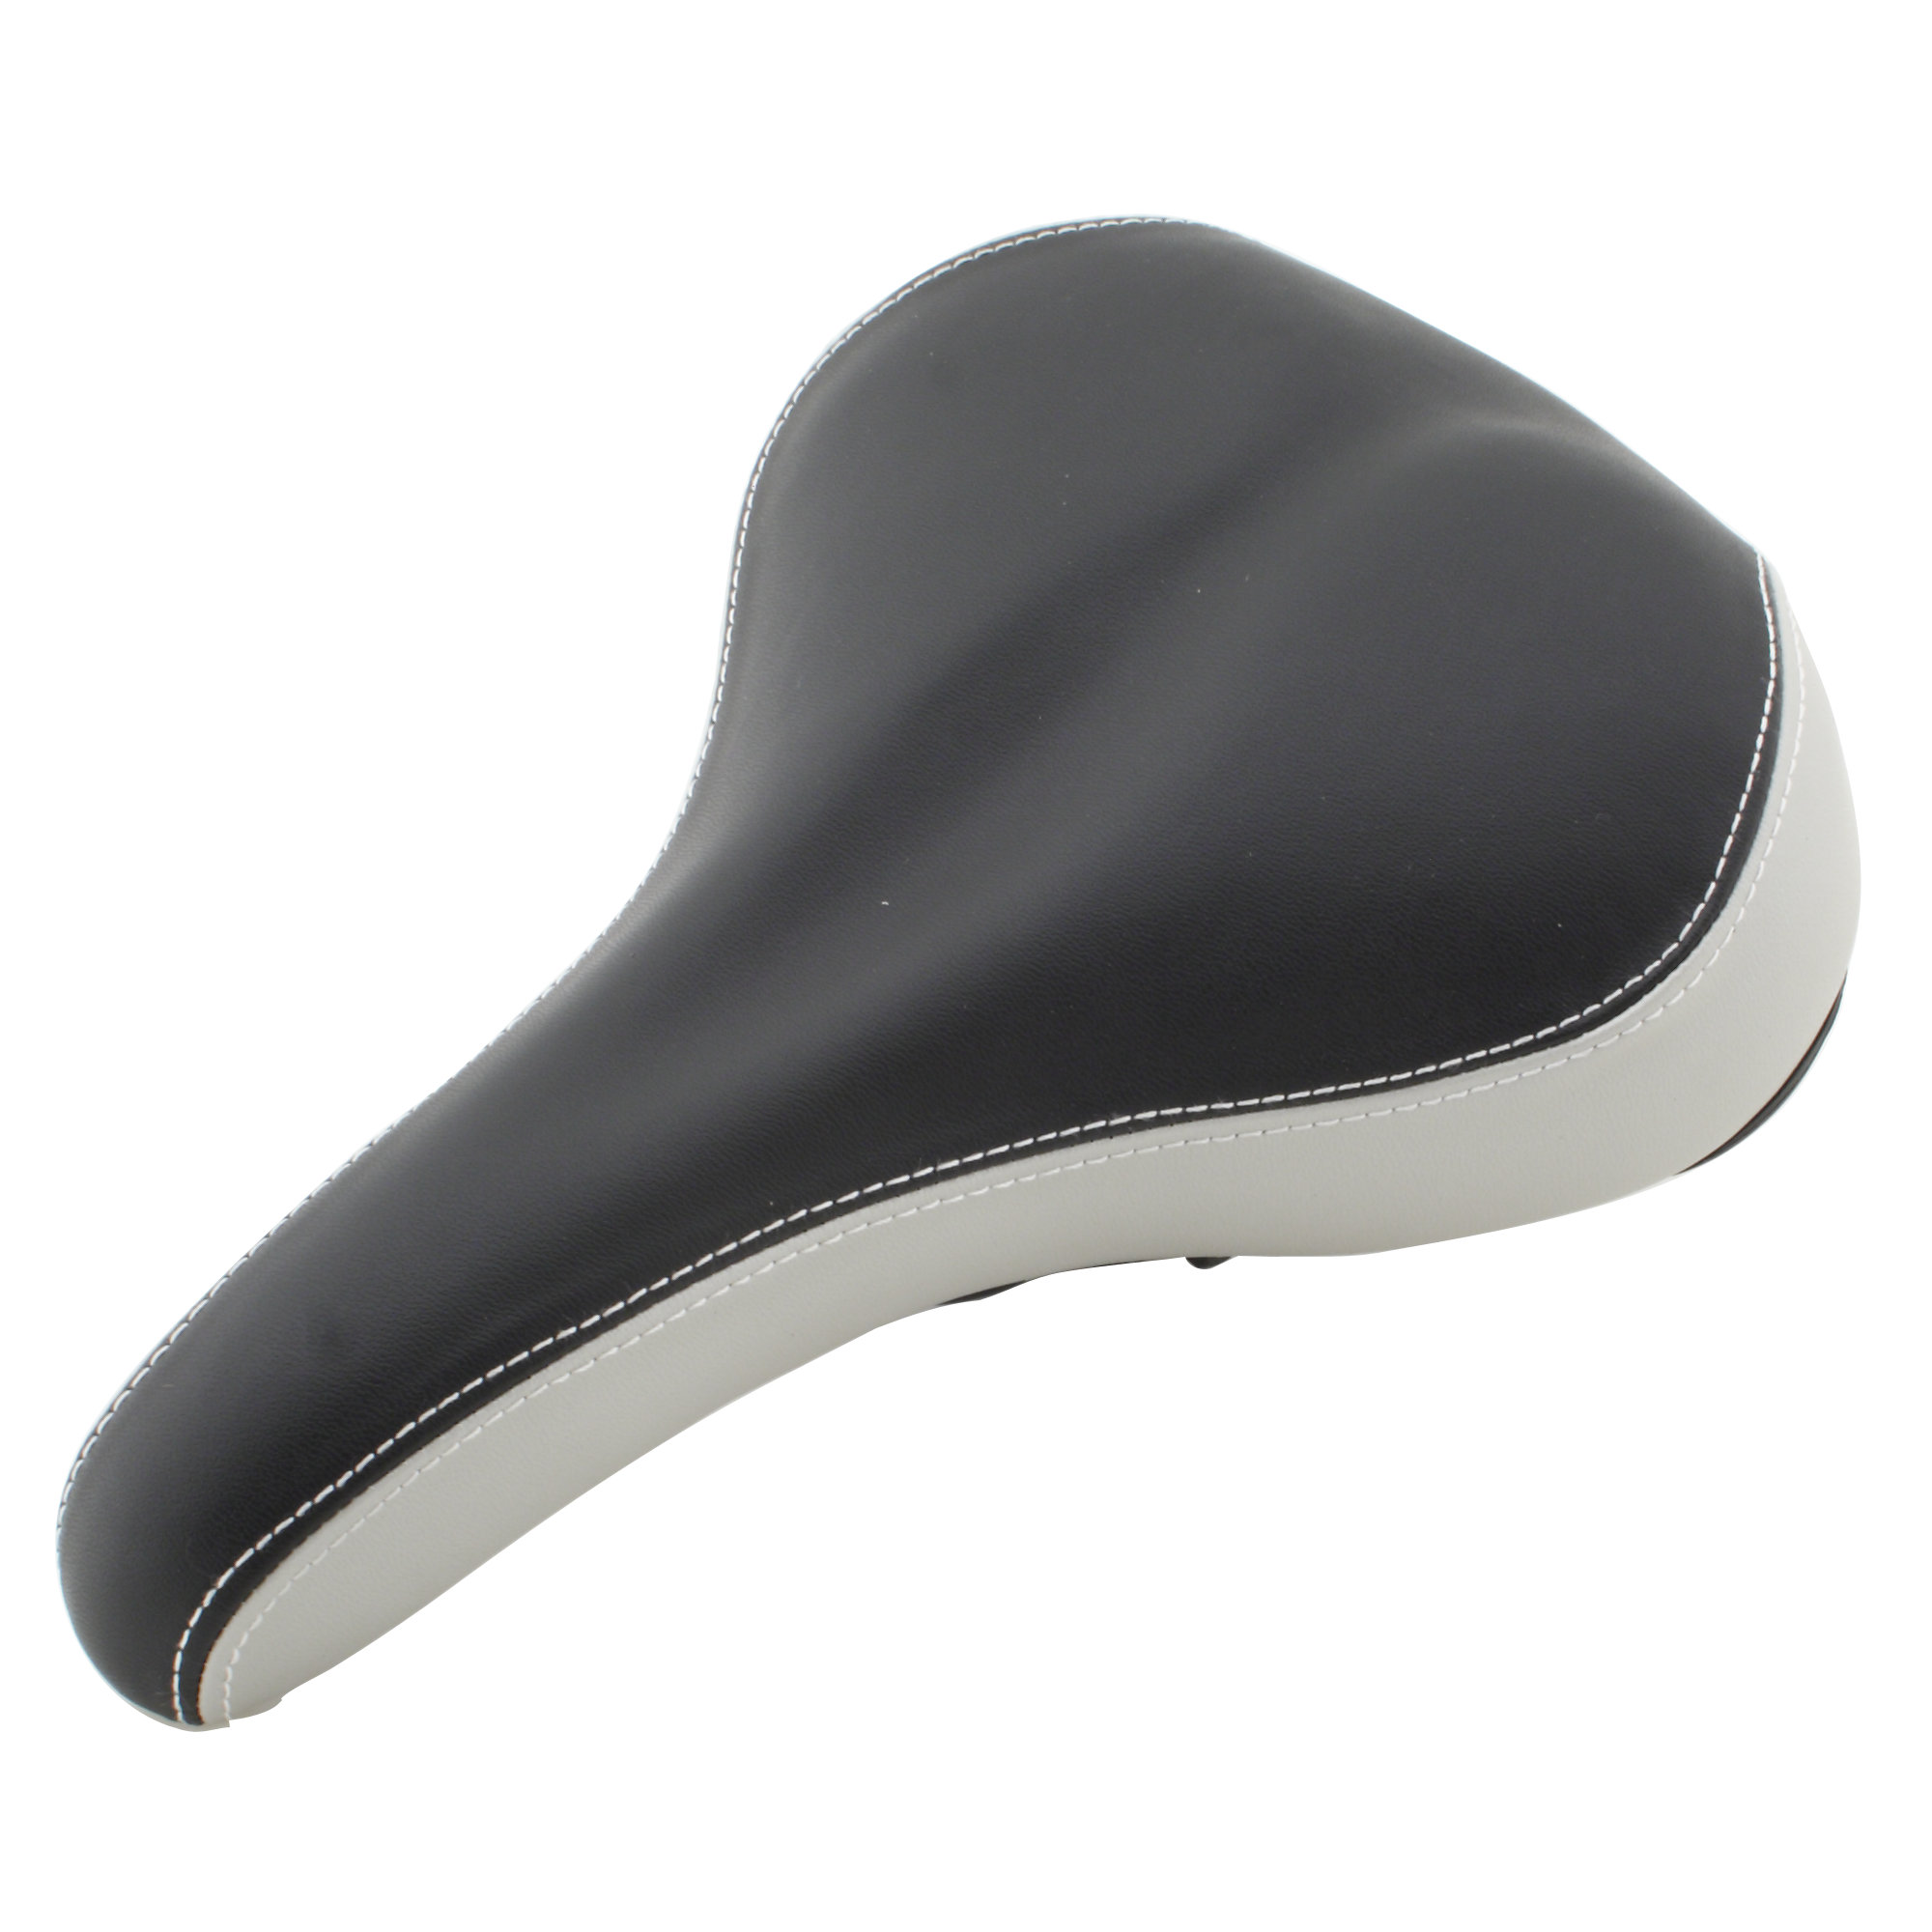 Bike Seat for Indoor Cycles